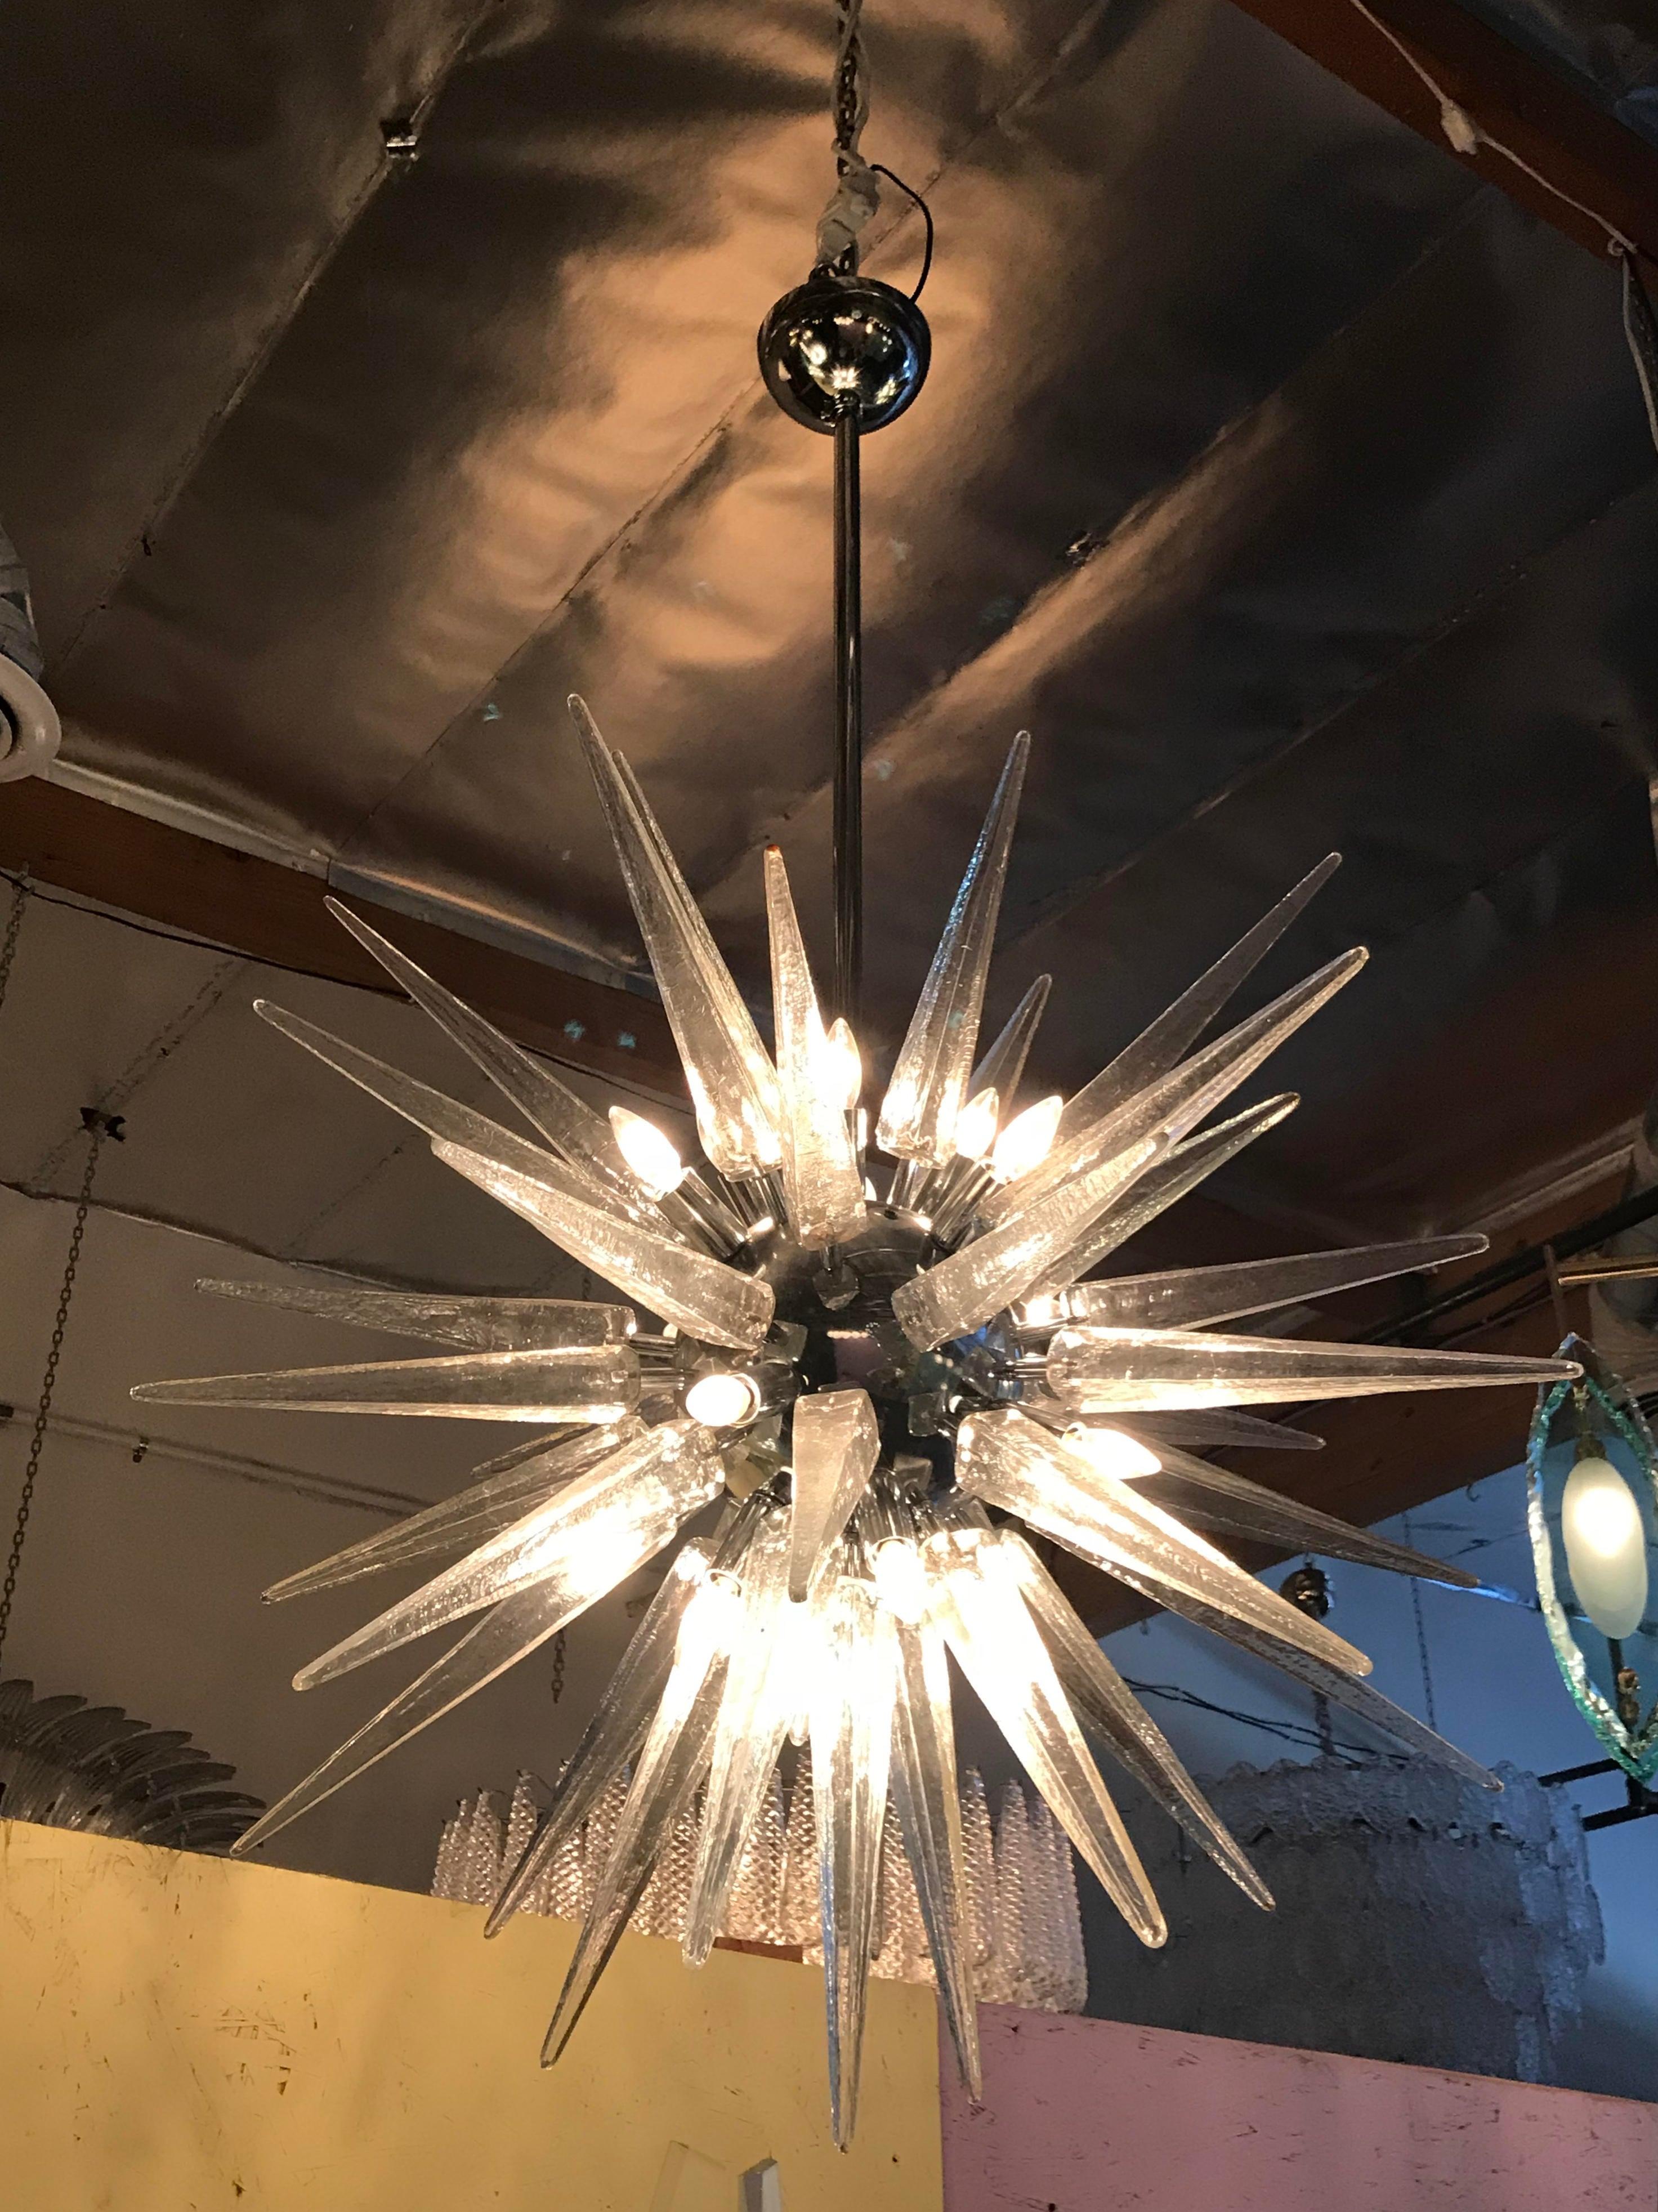 Italian modern Sputnik chandelier with clear Murano glass shards spikes, mounted on chrome metal frame / designed by Fabio Bergomi for Fabio Ltd, made in Italy
16-light / E12 or E14 type / max 40W each
Measures: Diameter 35 inches, height 55 inches